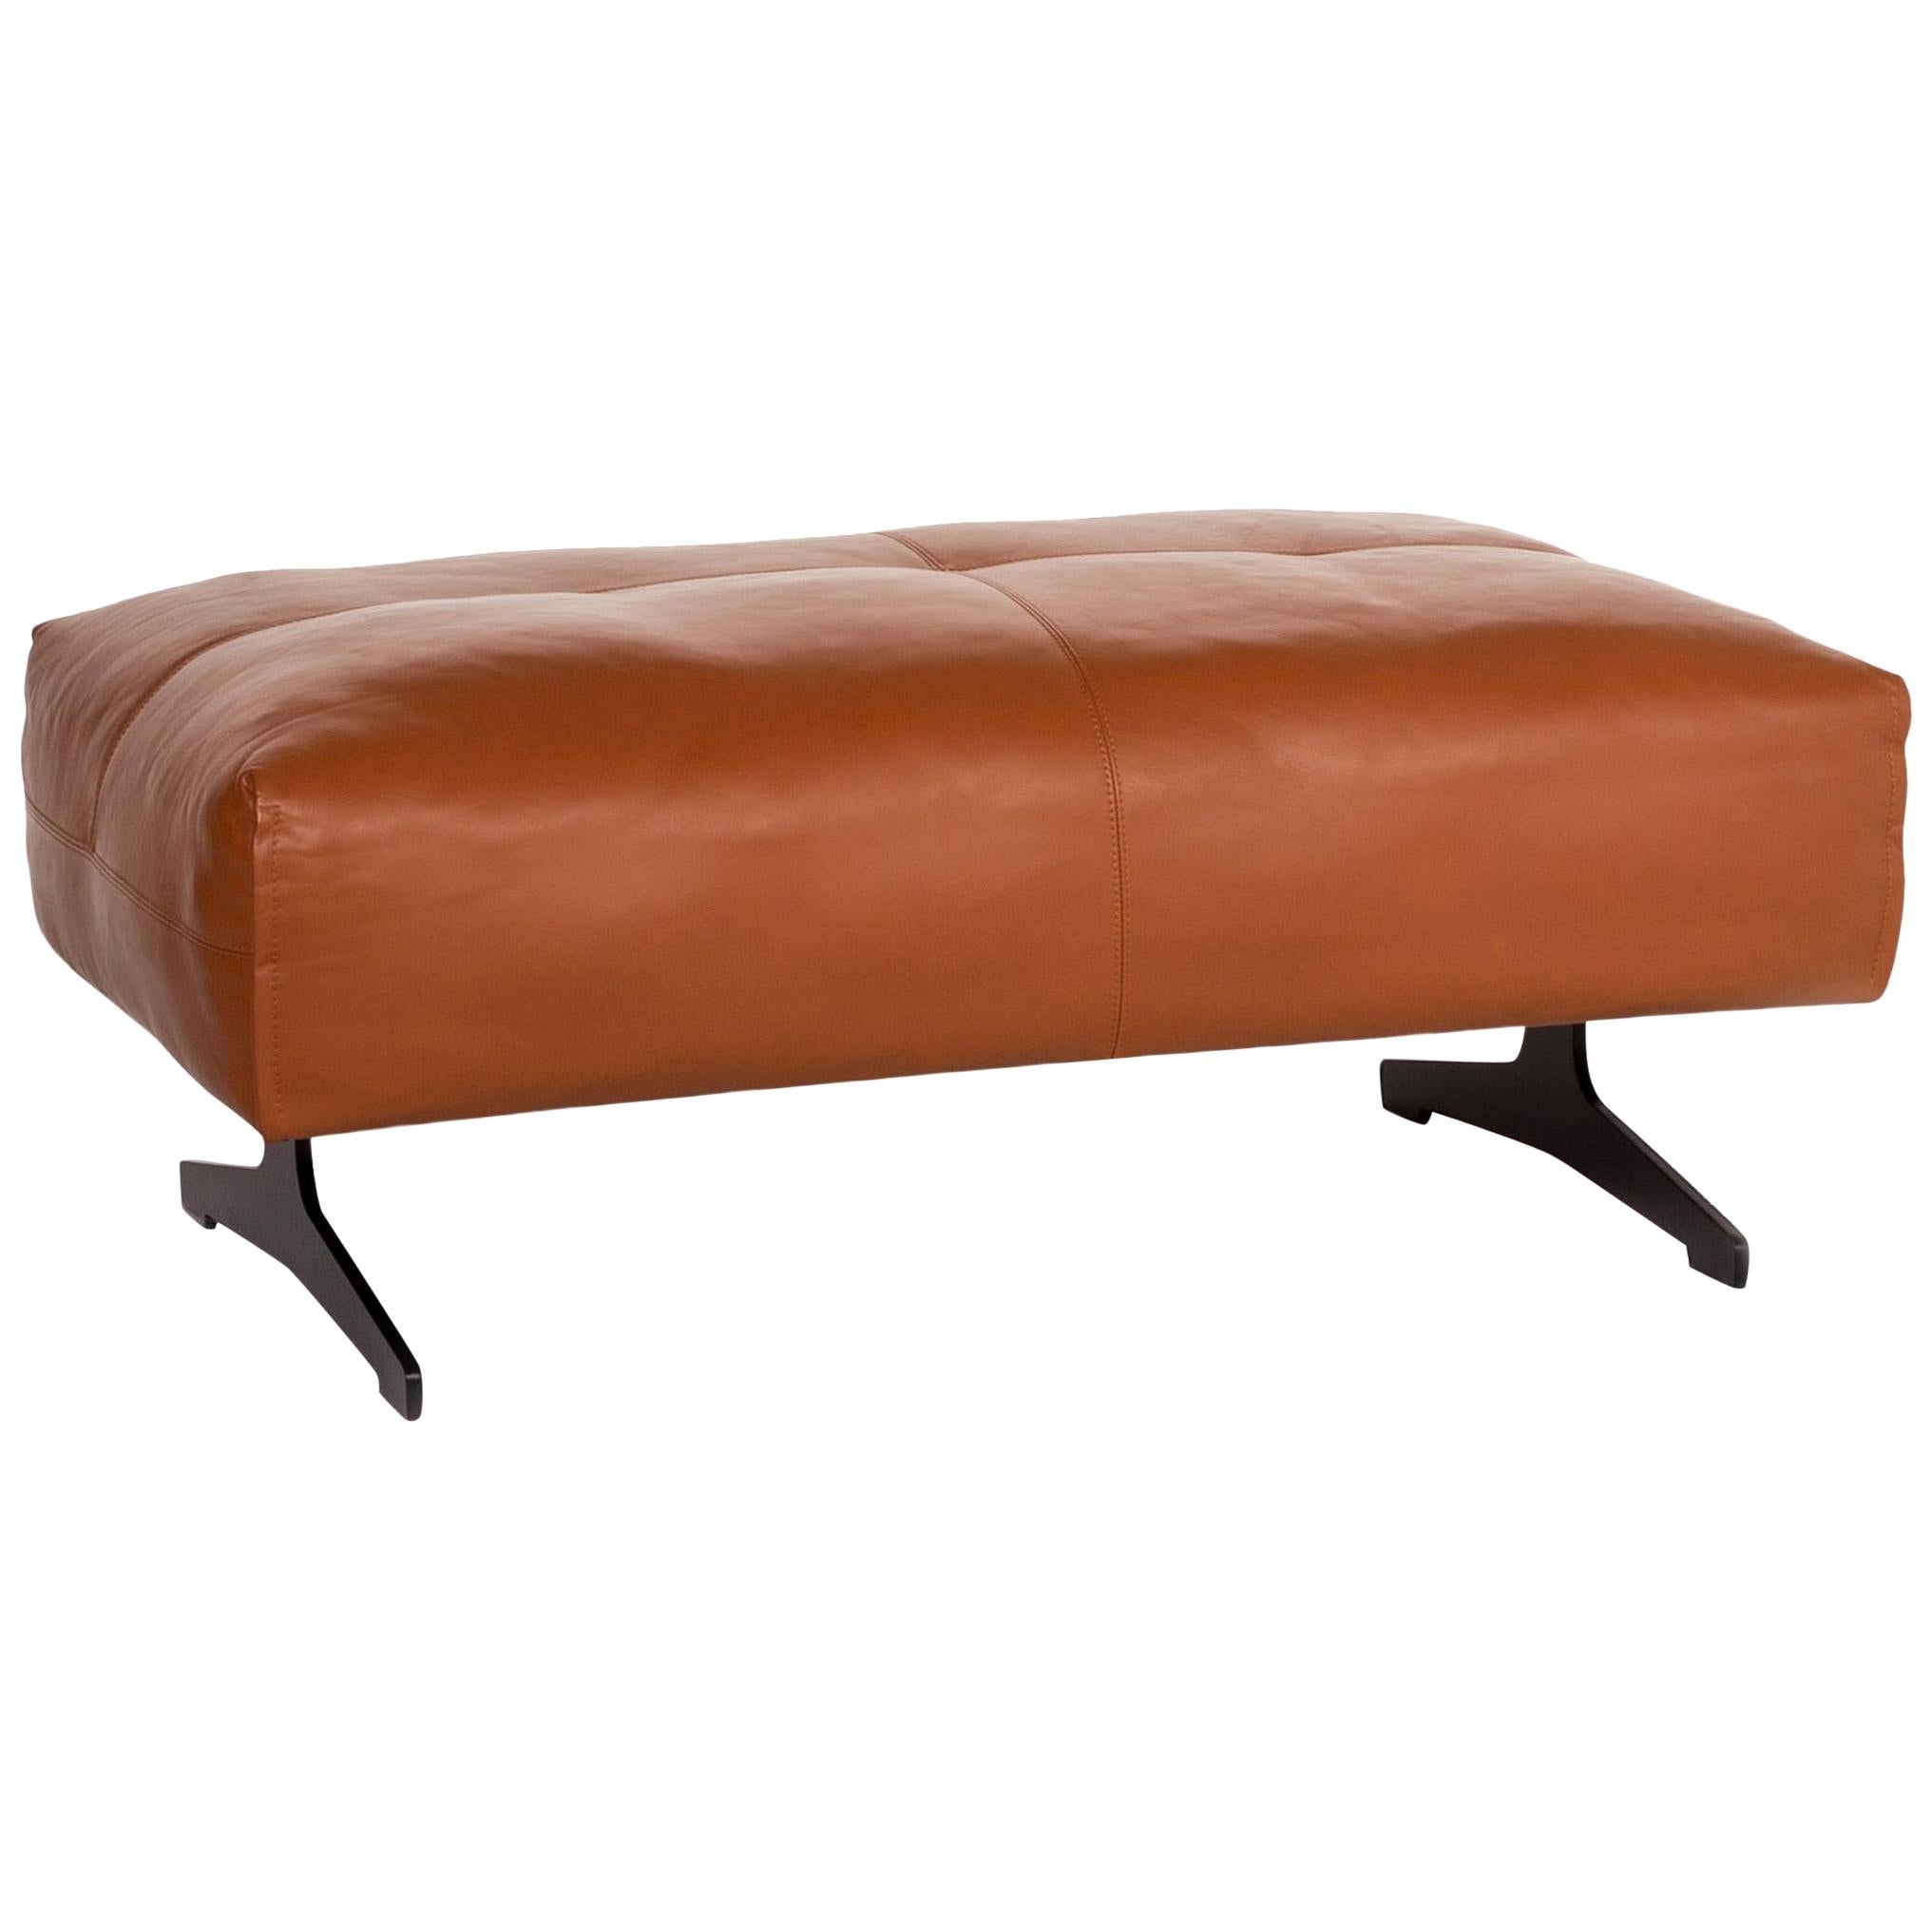 Rolf Benz 50 Leather Stool Cognac Brown Ottoman For Sale